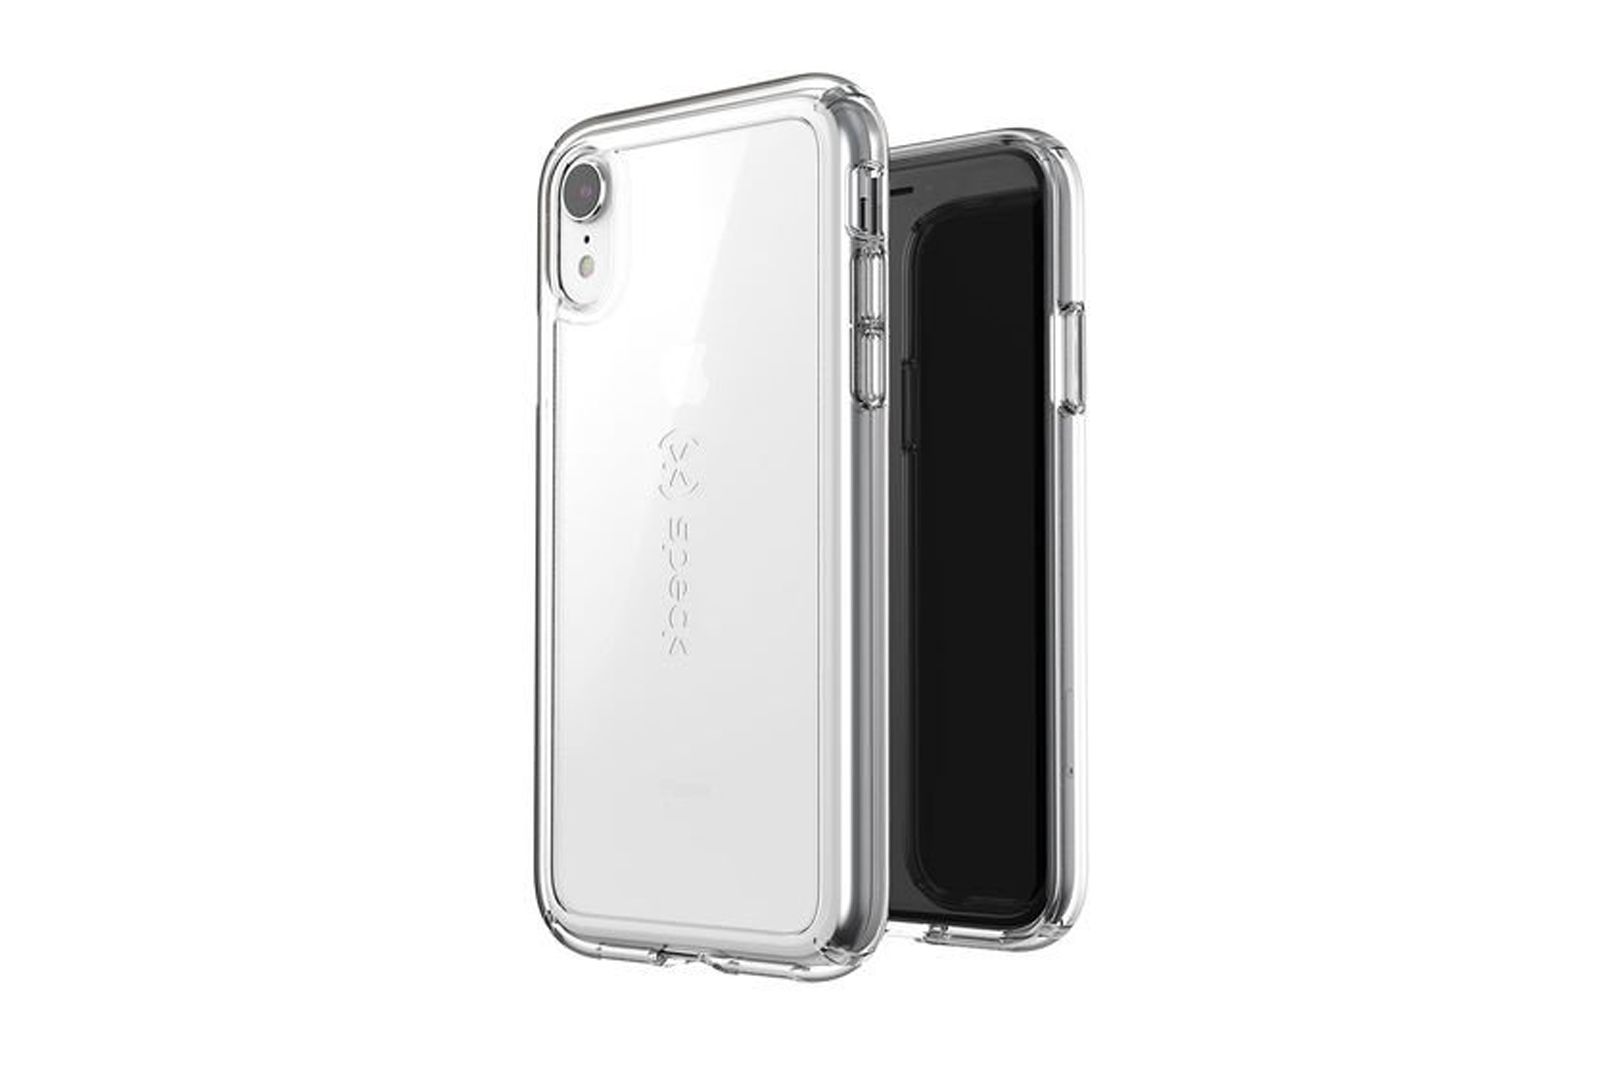 Best Iphone Xr Cases Protect Your New Apple Device image 10